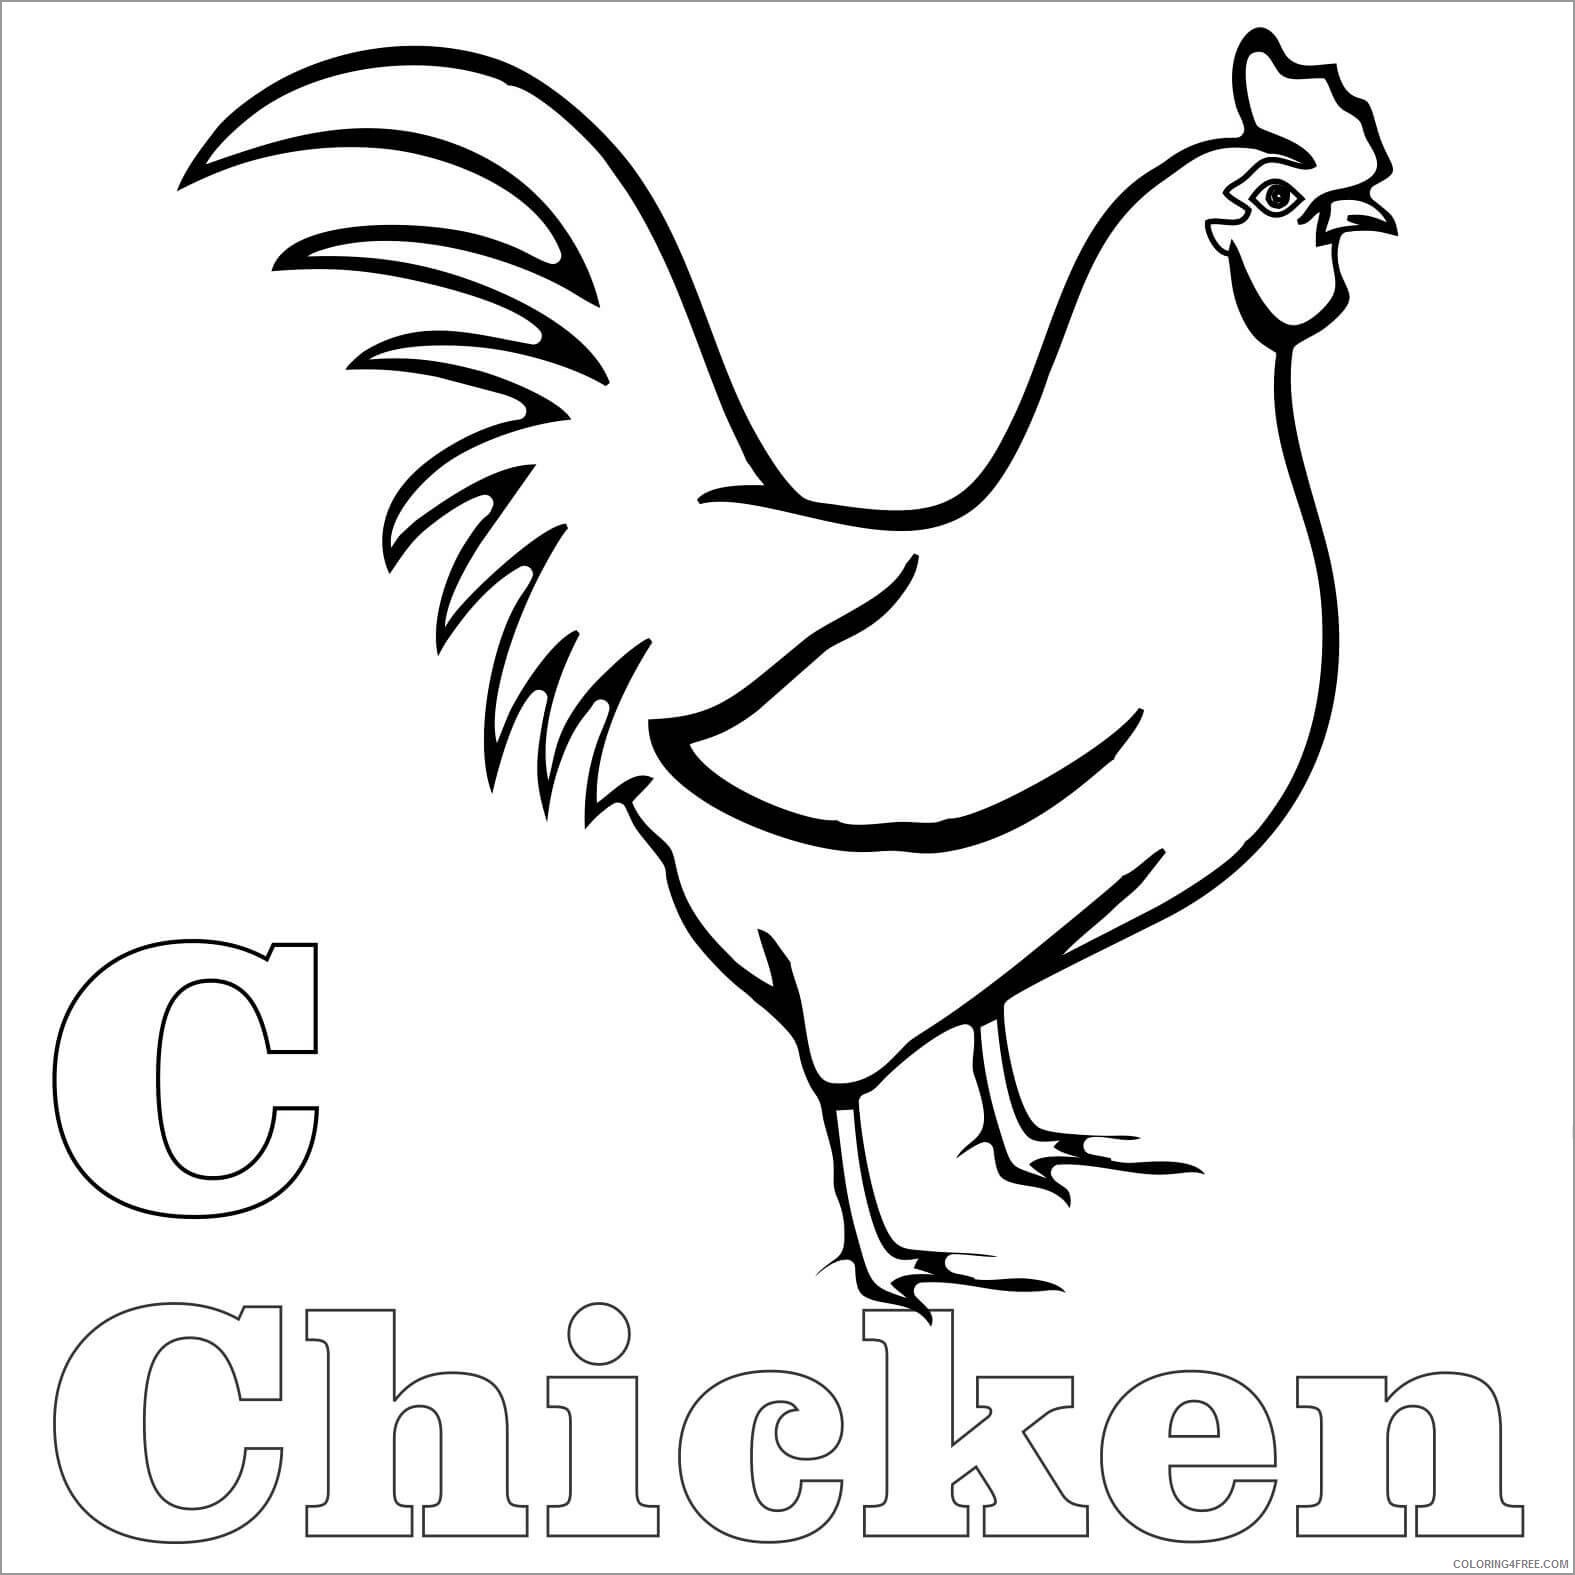 Chicken Coloring Pages Animal Printable Sheets c for chicken 2021 1042 Coloring4free